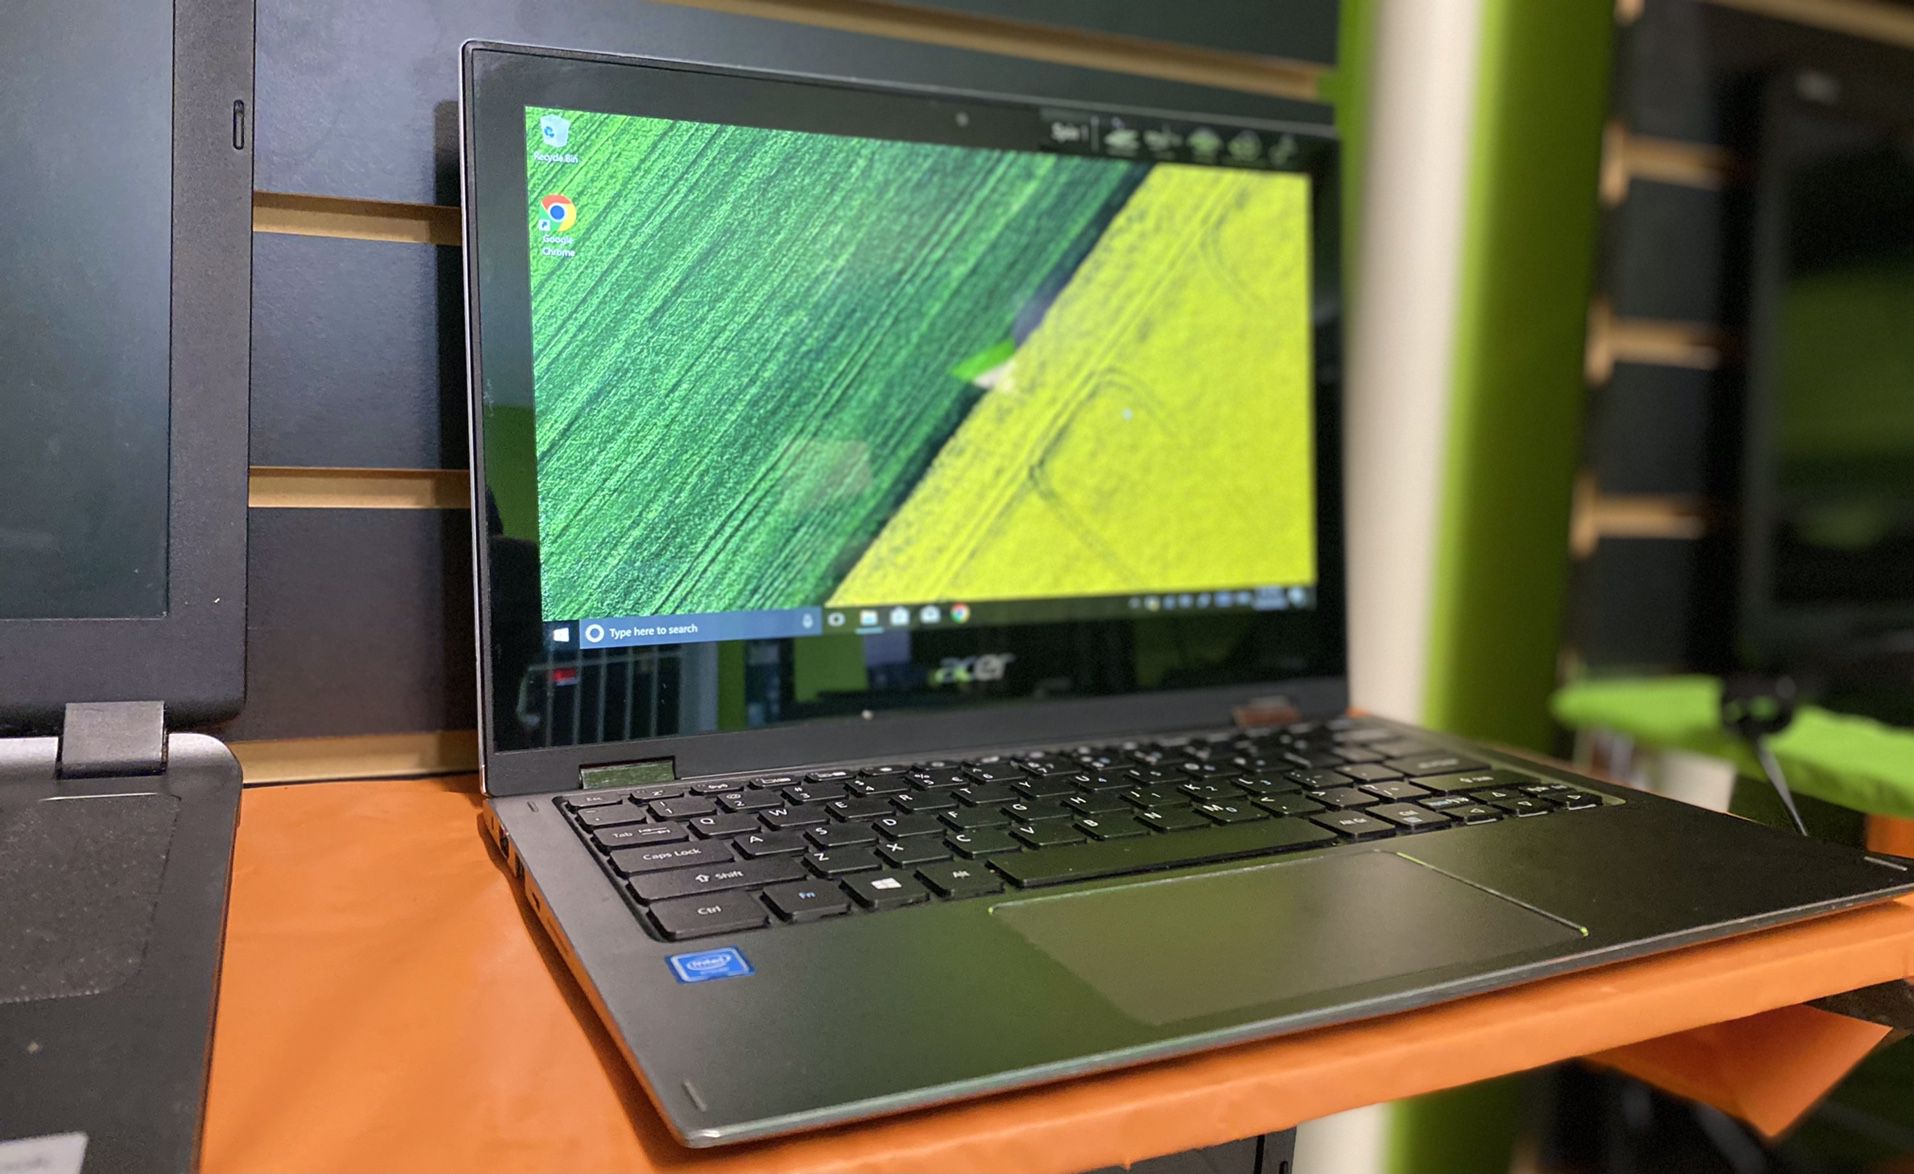 🎊BLOWOUT SALE TODAY 🤩TOUCHSCREEN ACER LAPTOP 💻 